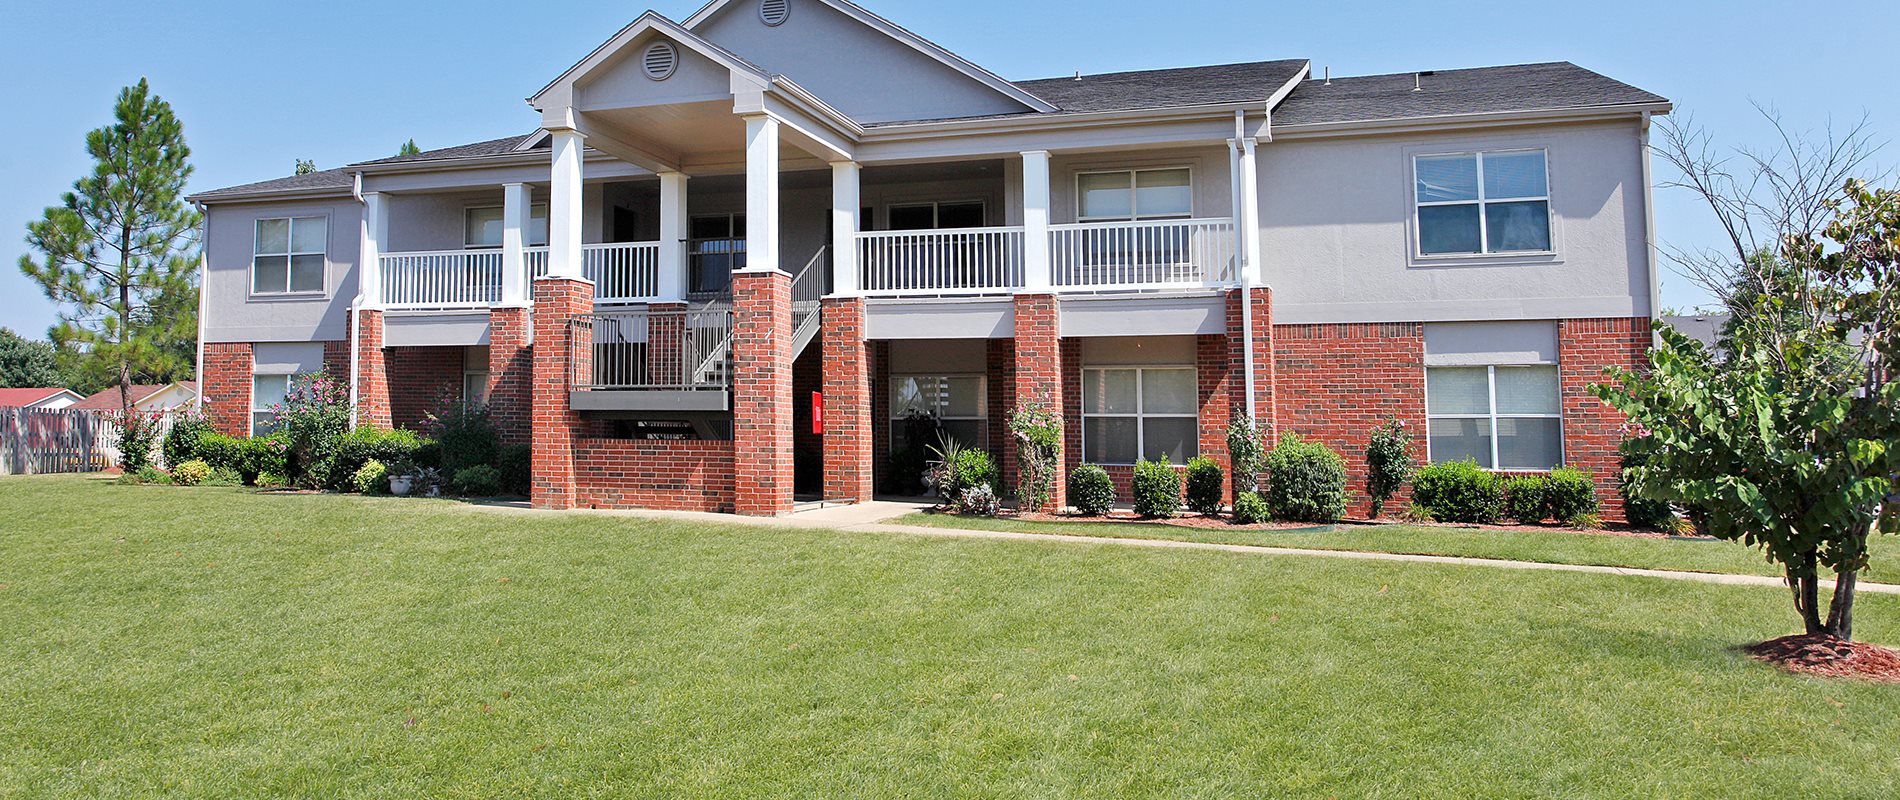 Spring Lake I Ii Apartments In Russellville